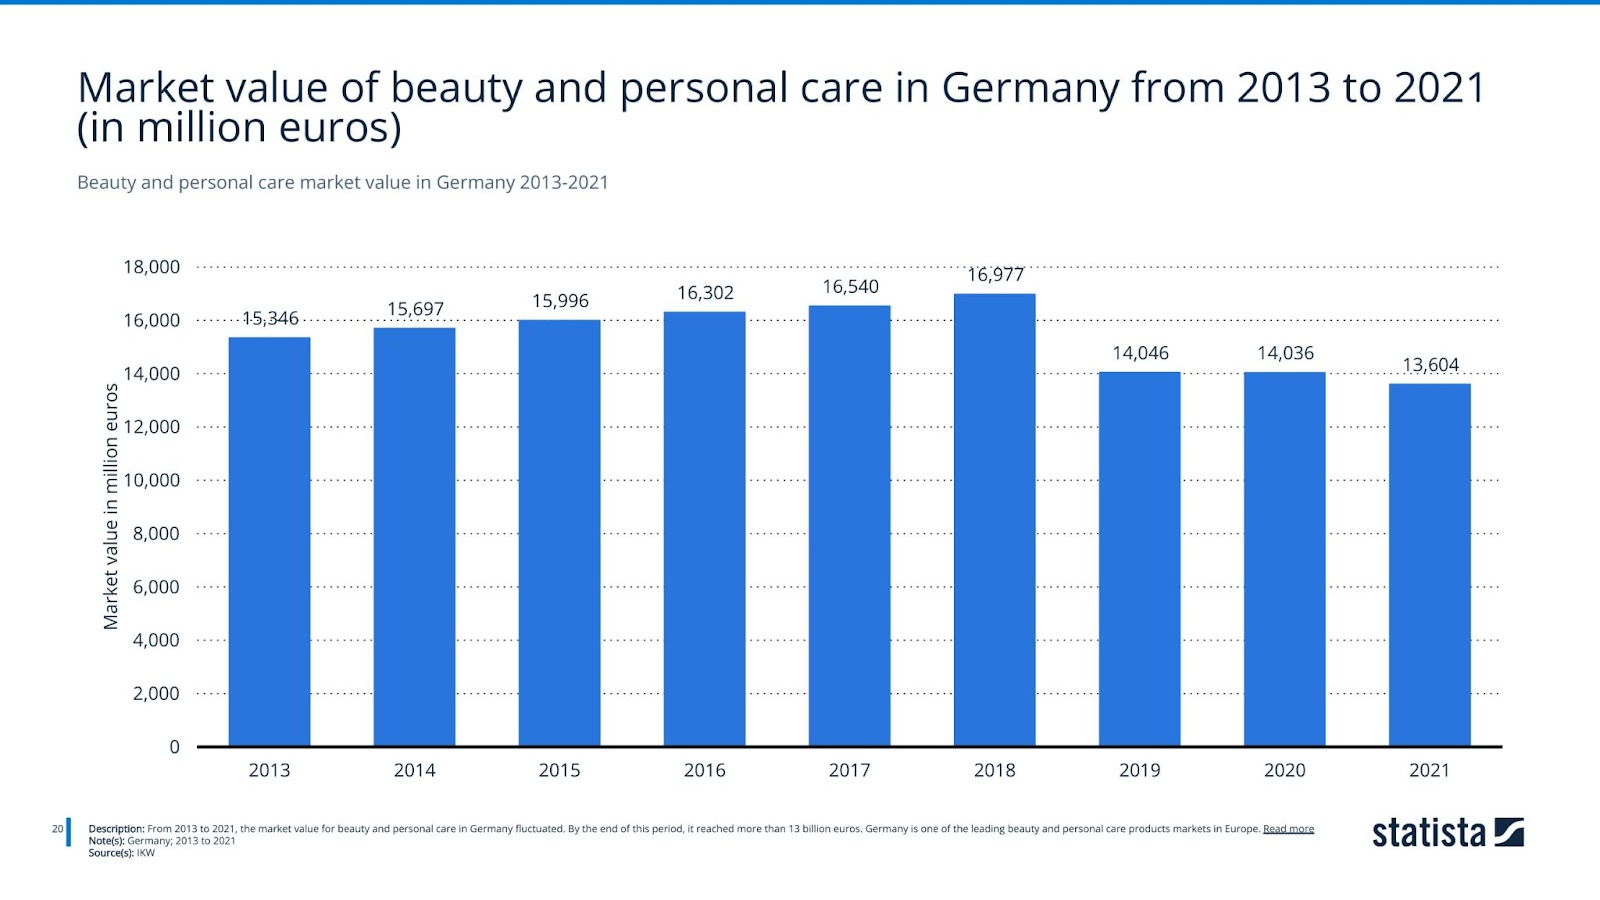 Beauty and personal care market value in Germany 2013-2021